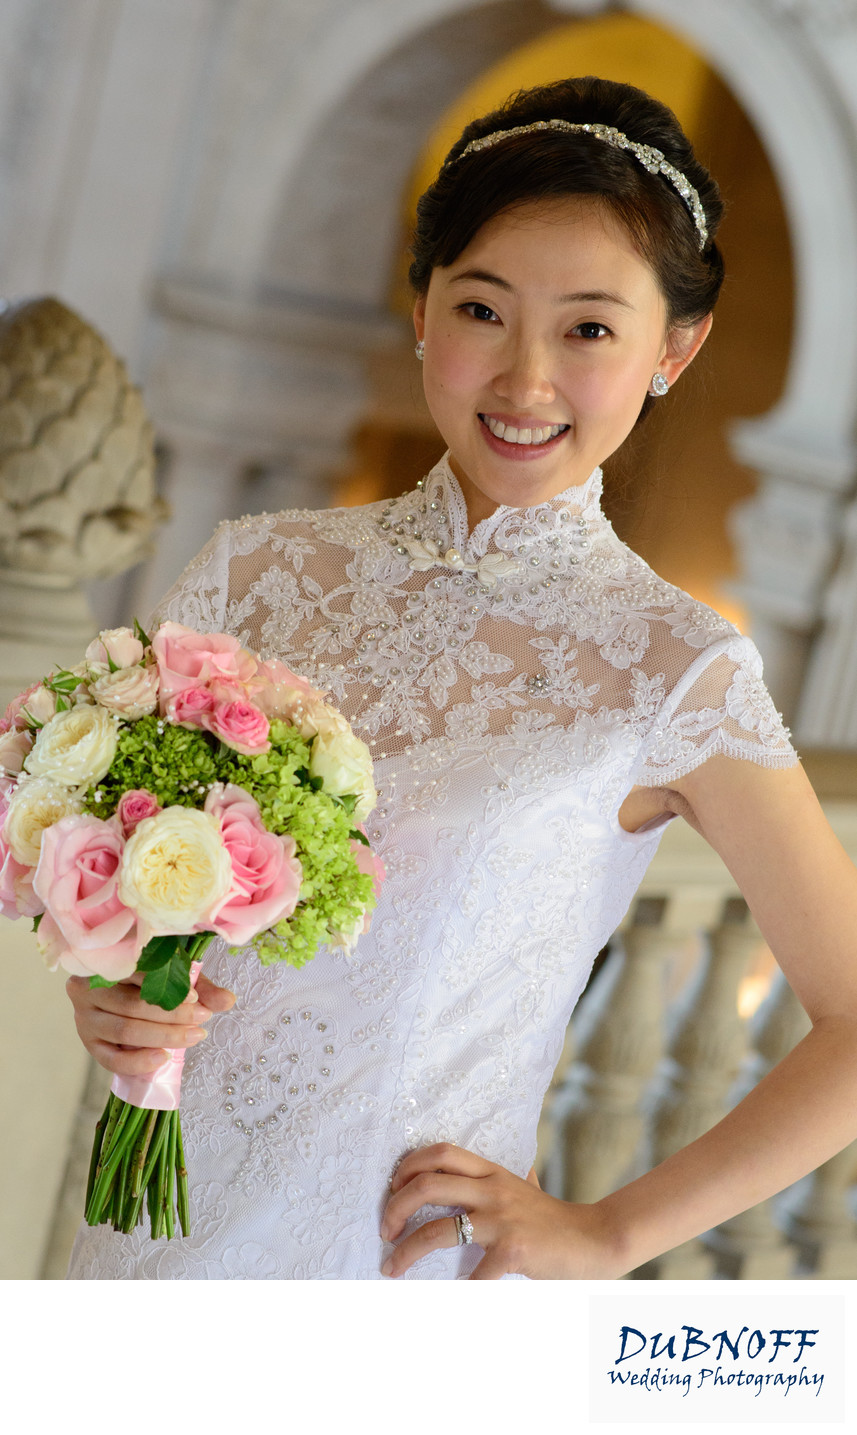 Asian Bride Bouquet With Natural Frame at City Hall